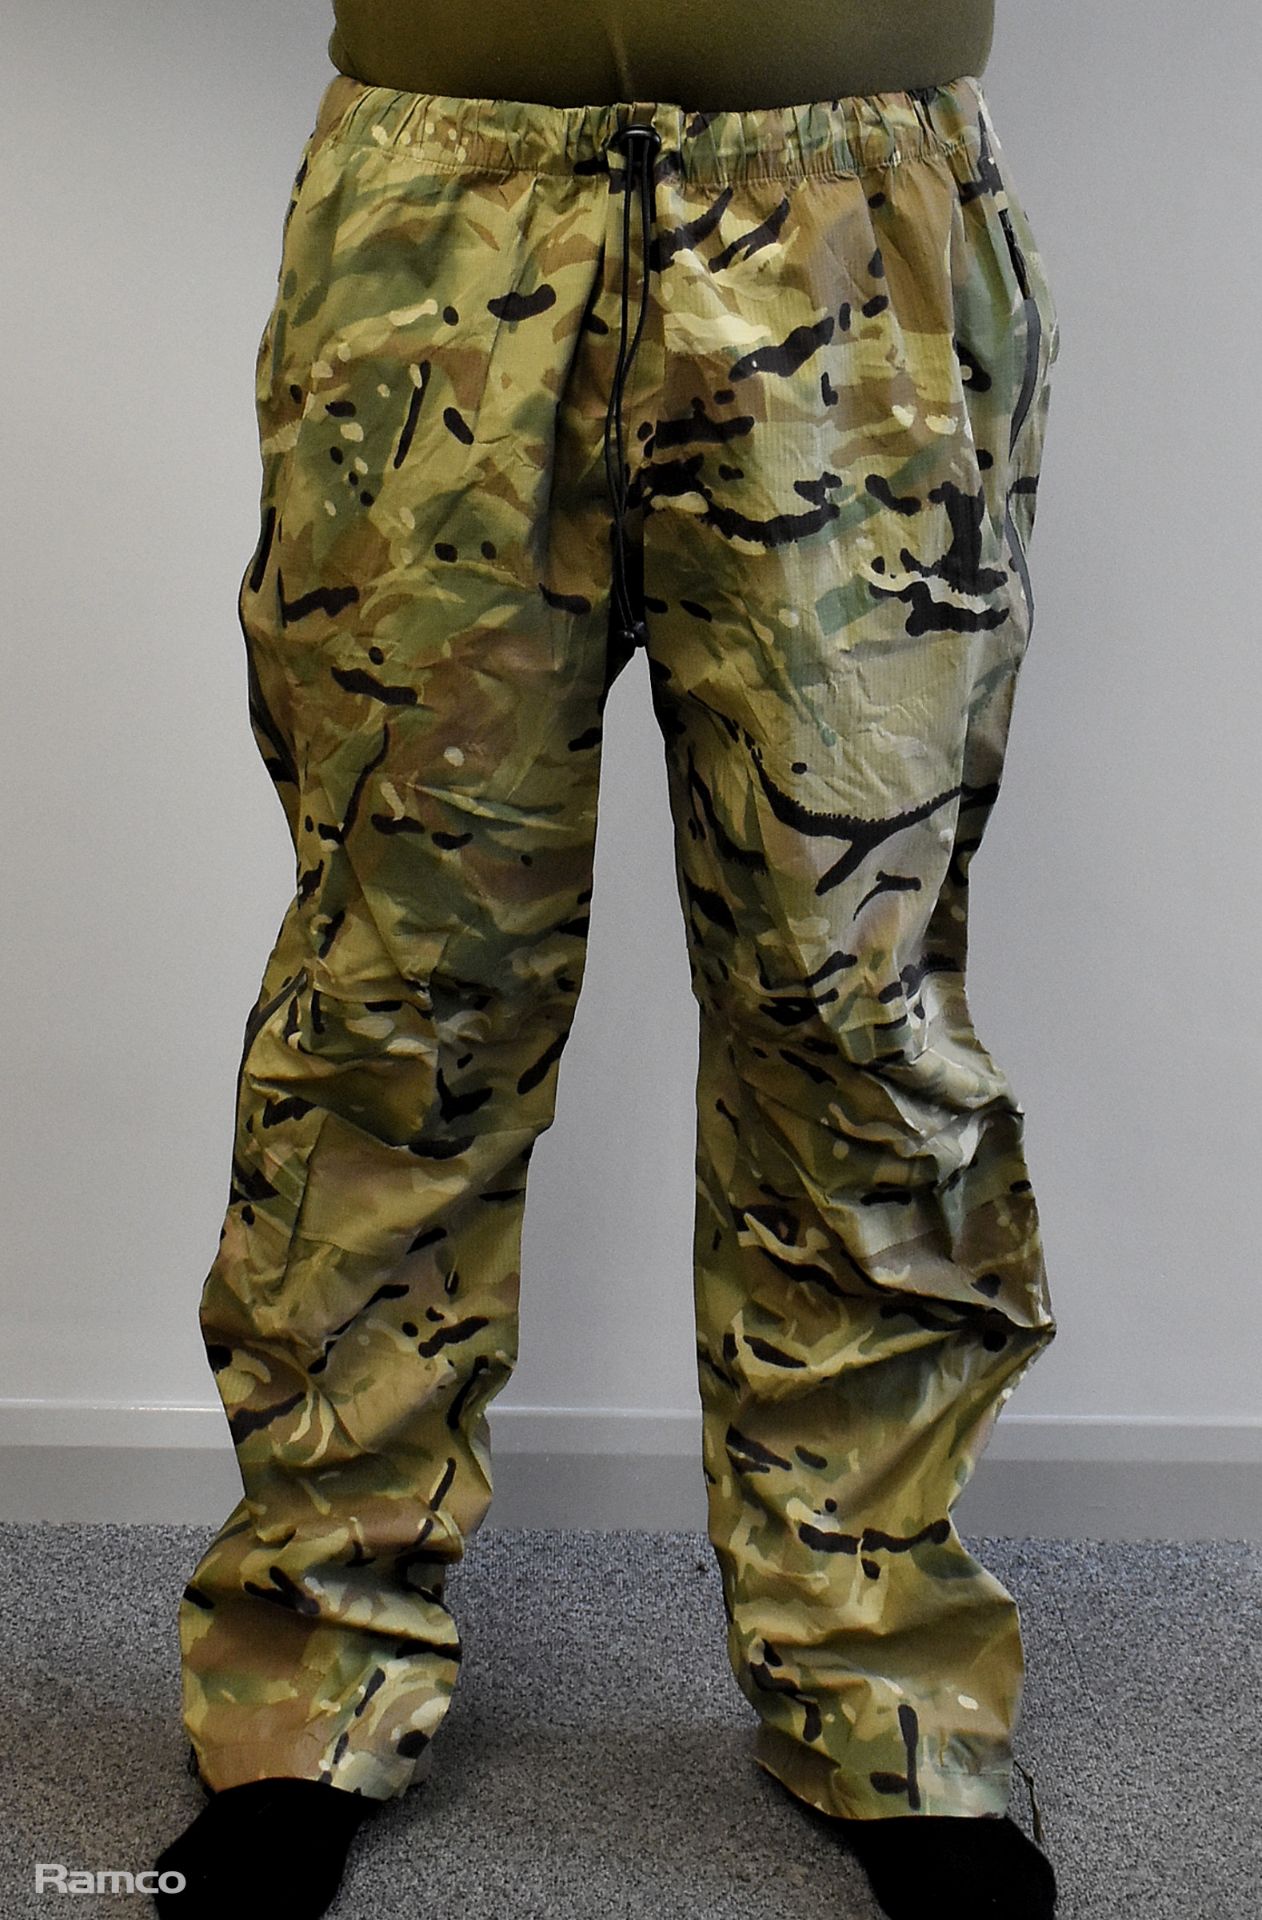 30x British Army MTP waterproof light weight trousers - mixed grades and sizes